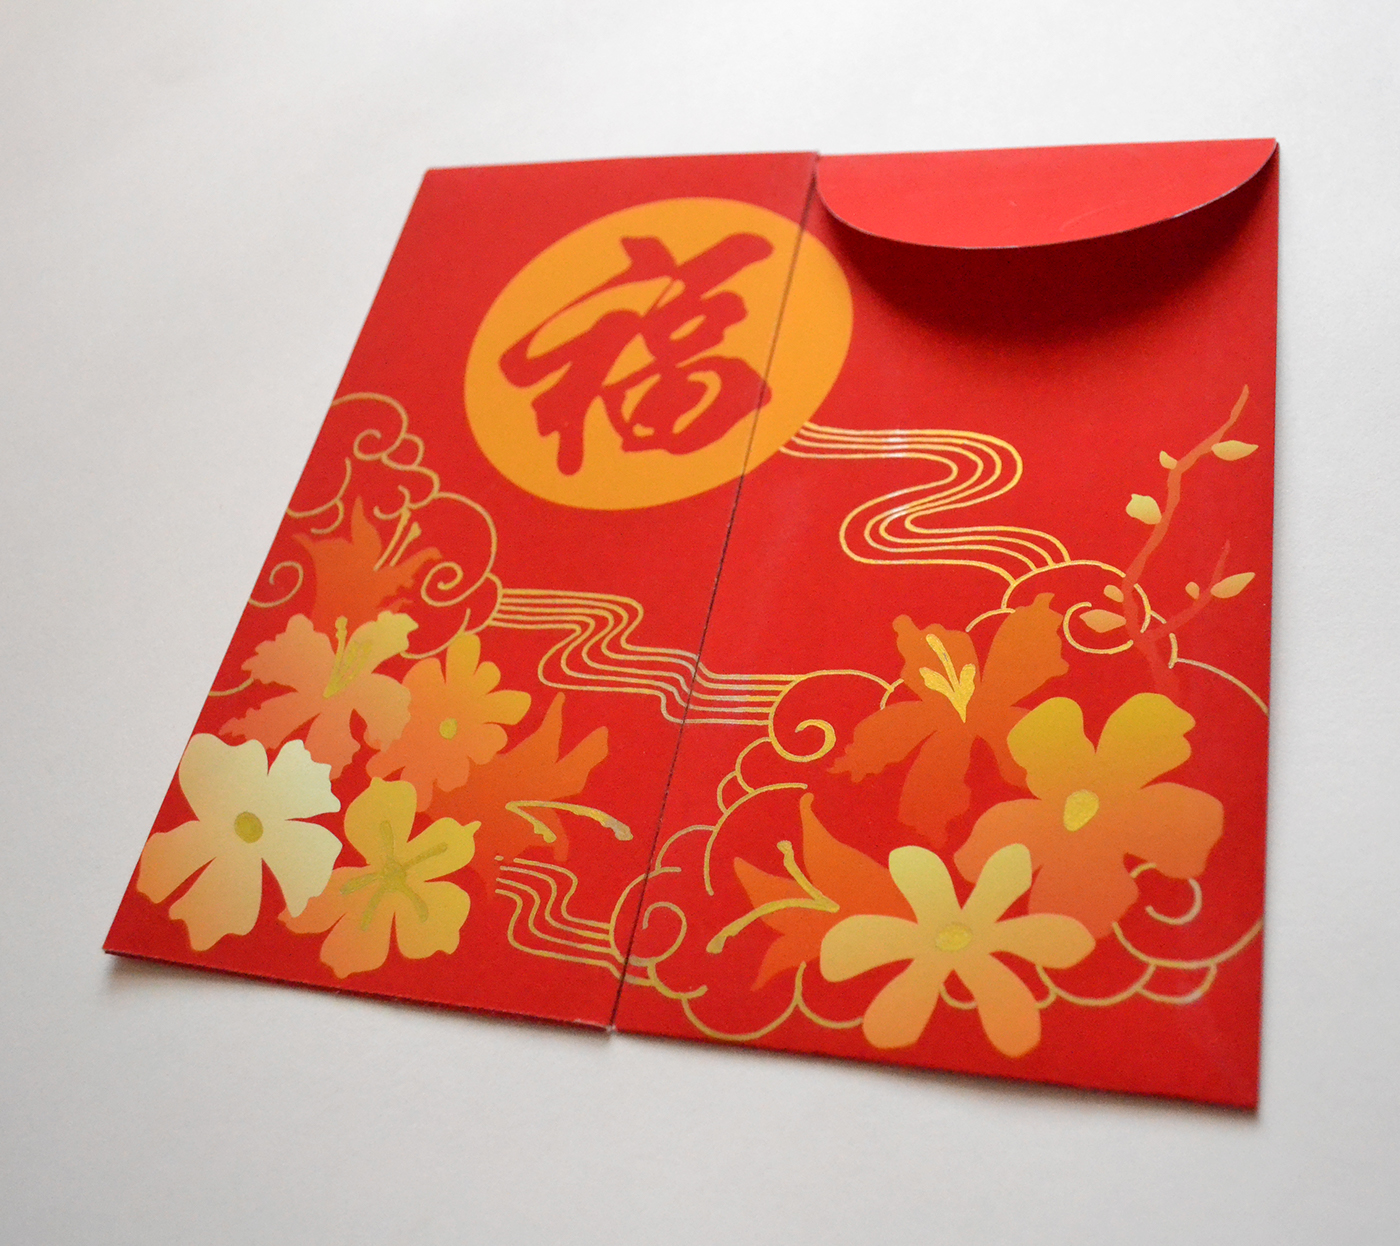 Red Envelope Die Cuts - Chinese New Year Graphic by Plam.mi Design Studio ·  Creative Fabrica